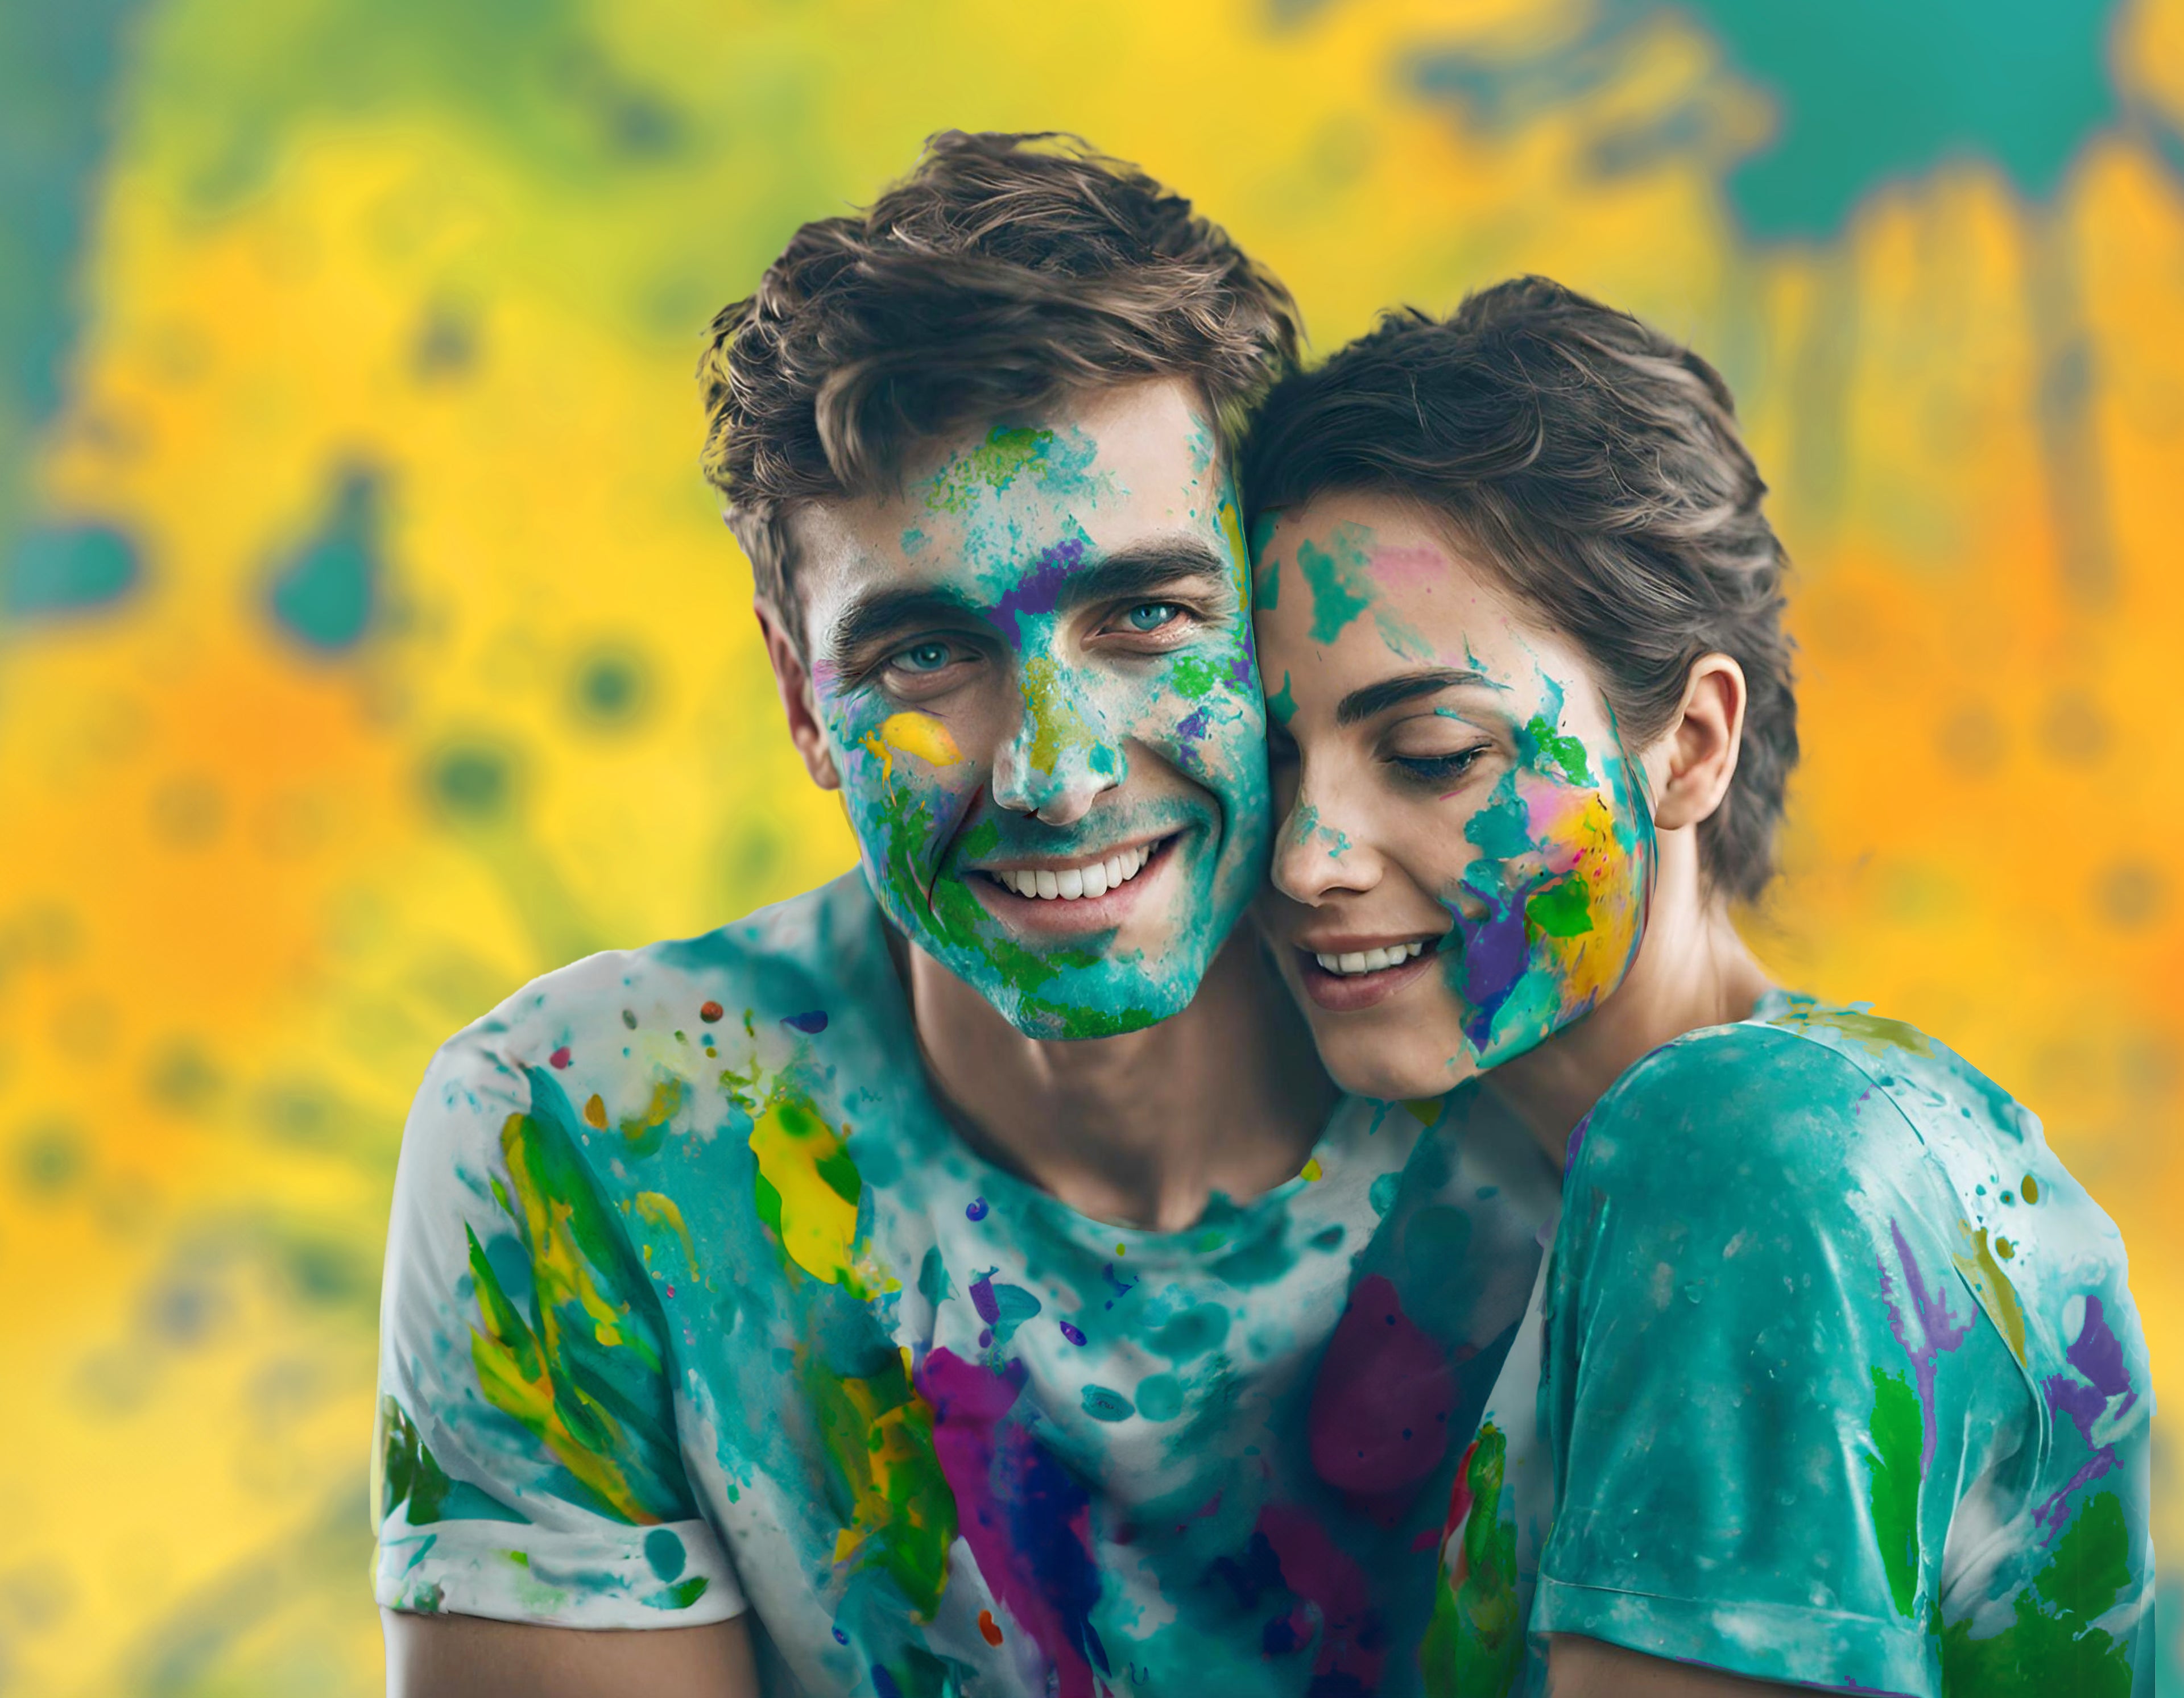 Man and woman with teal, purple, yellow, and blue paint splashed on face and clothes. Representing GoldN's lab testing from home.